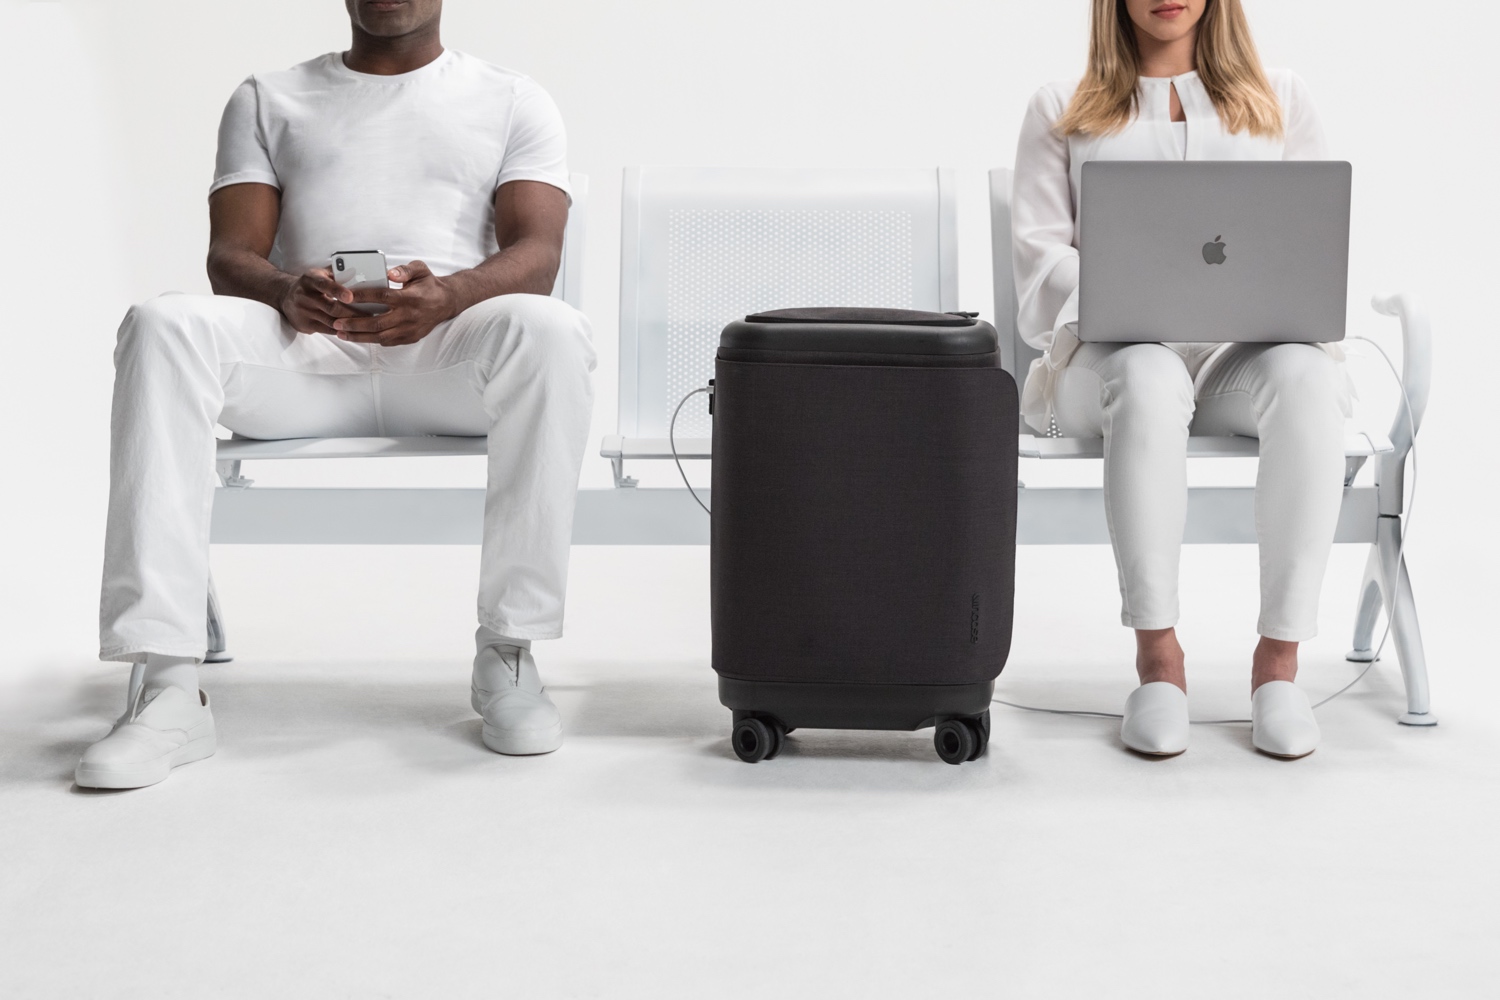 incase proconnected 4 wheel hubless roller smart luggage blends high design with large capacity battery lifestyle 0170